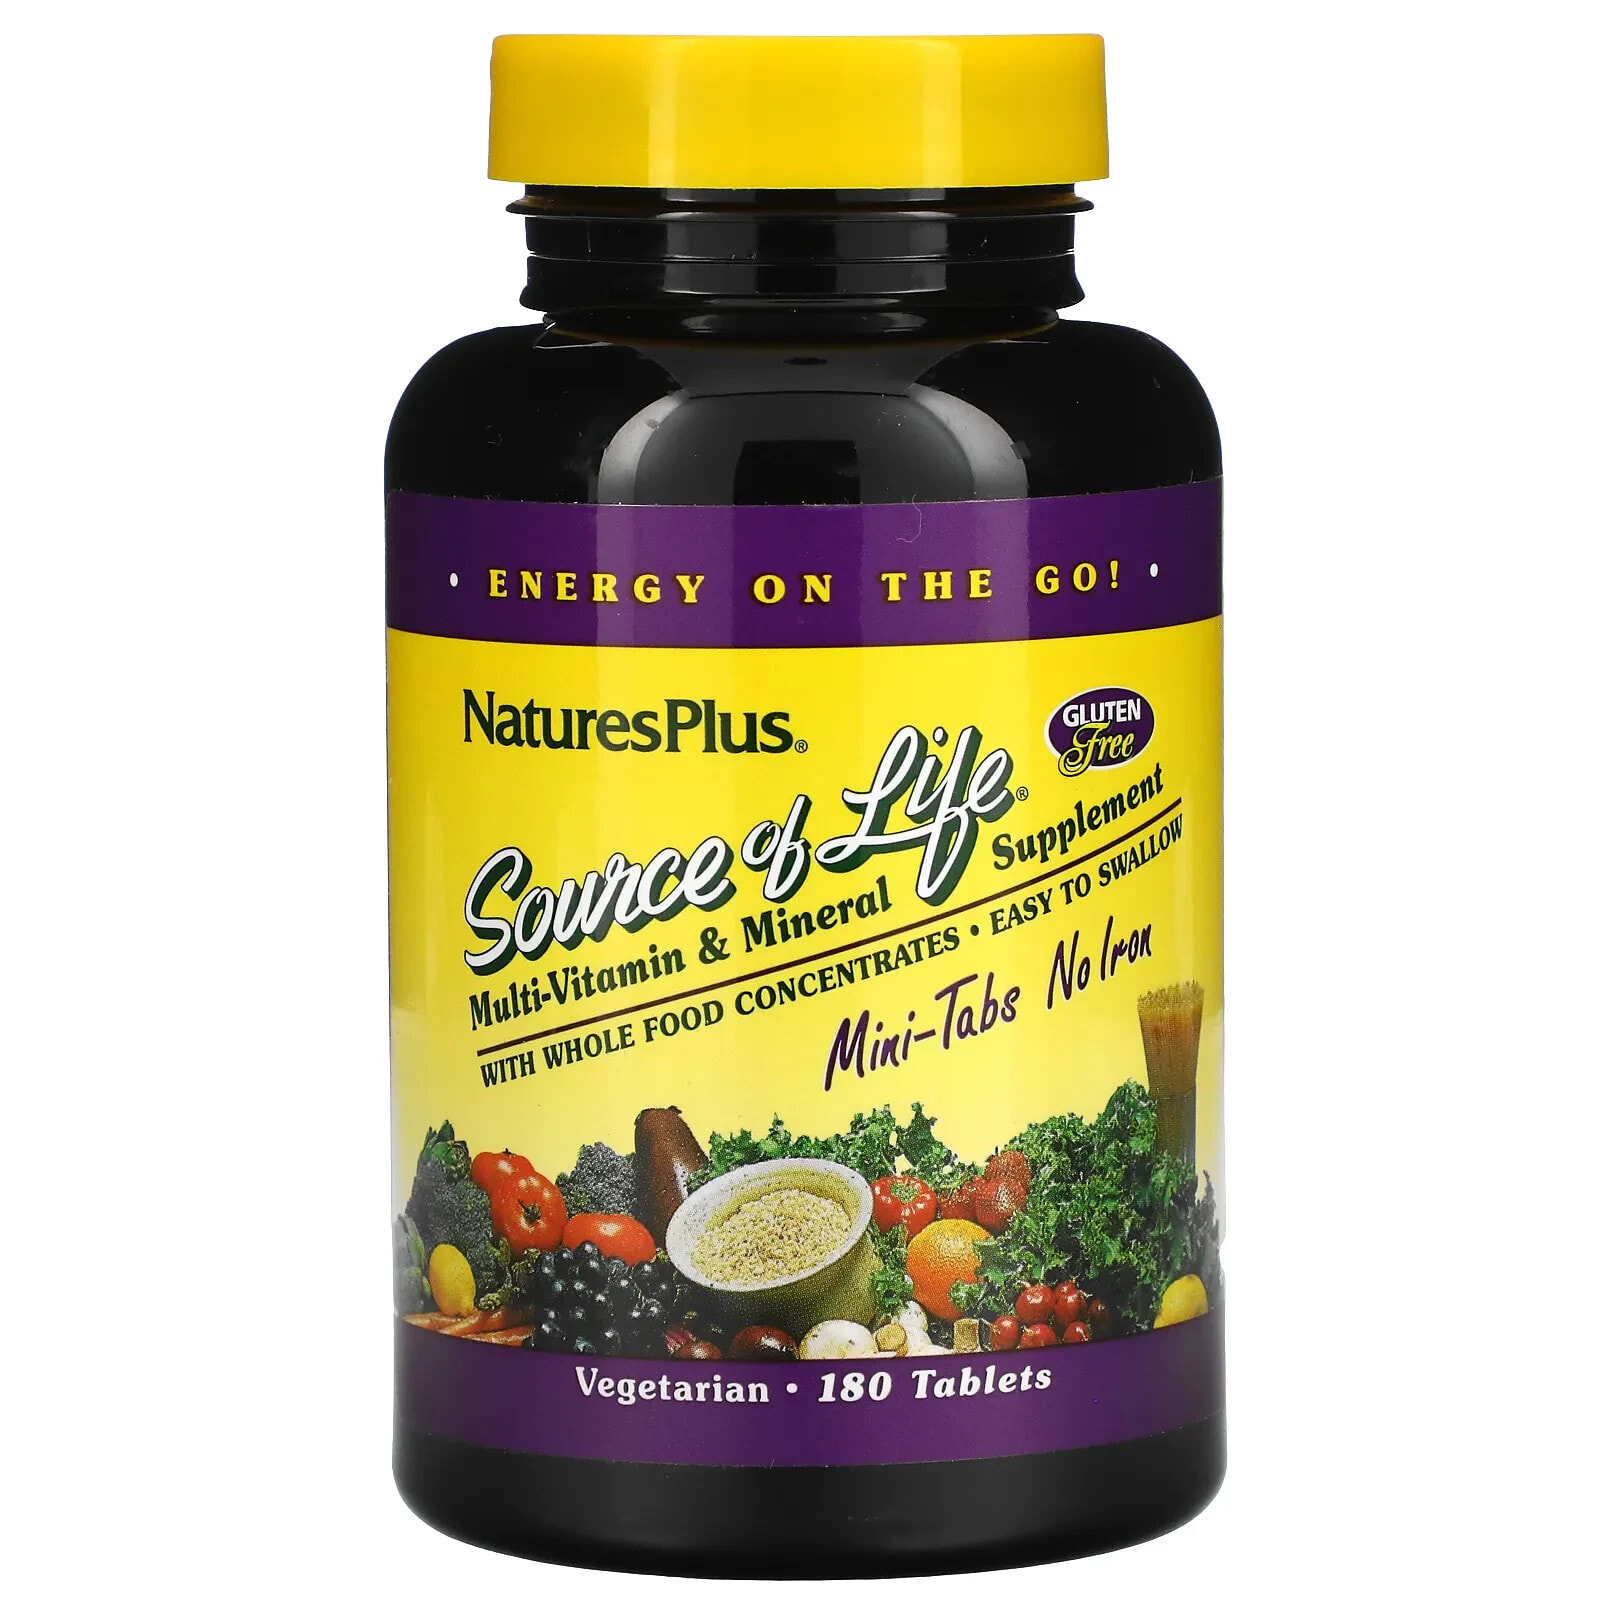 Source of Life, Original Mini-Tabs, Multivitamin & Mineral Supplement with Concentrated Whole Foods, Iron-Free, 180 Tablets